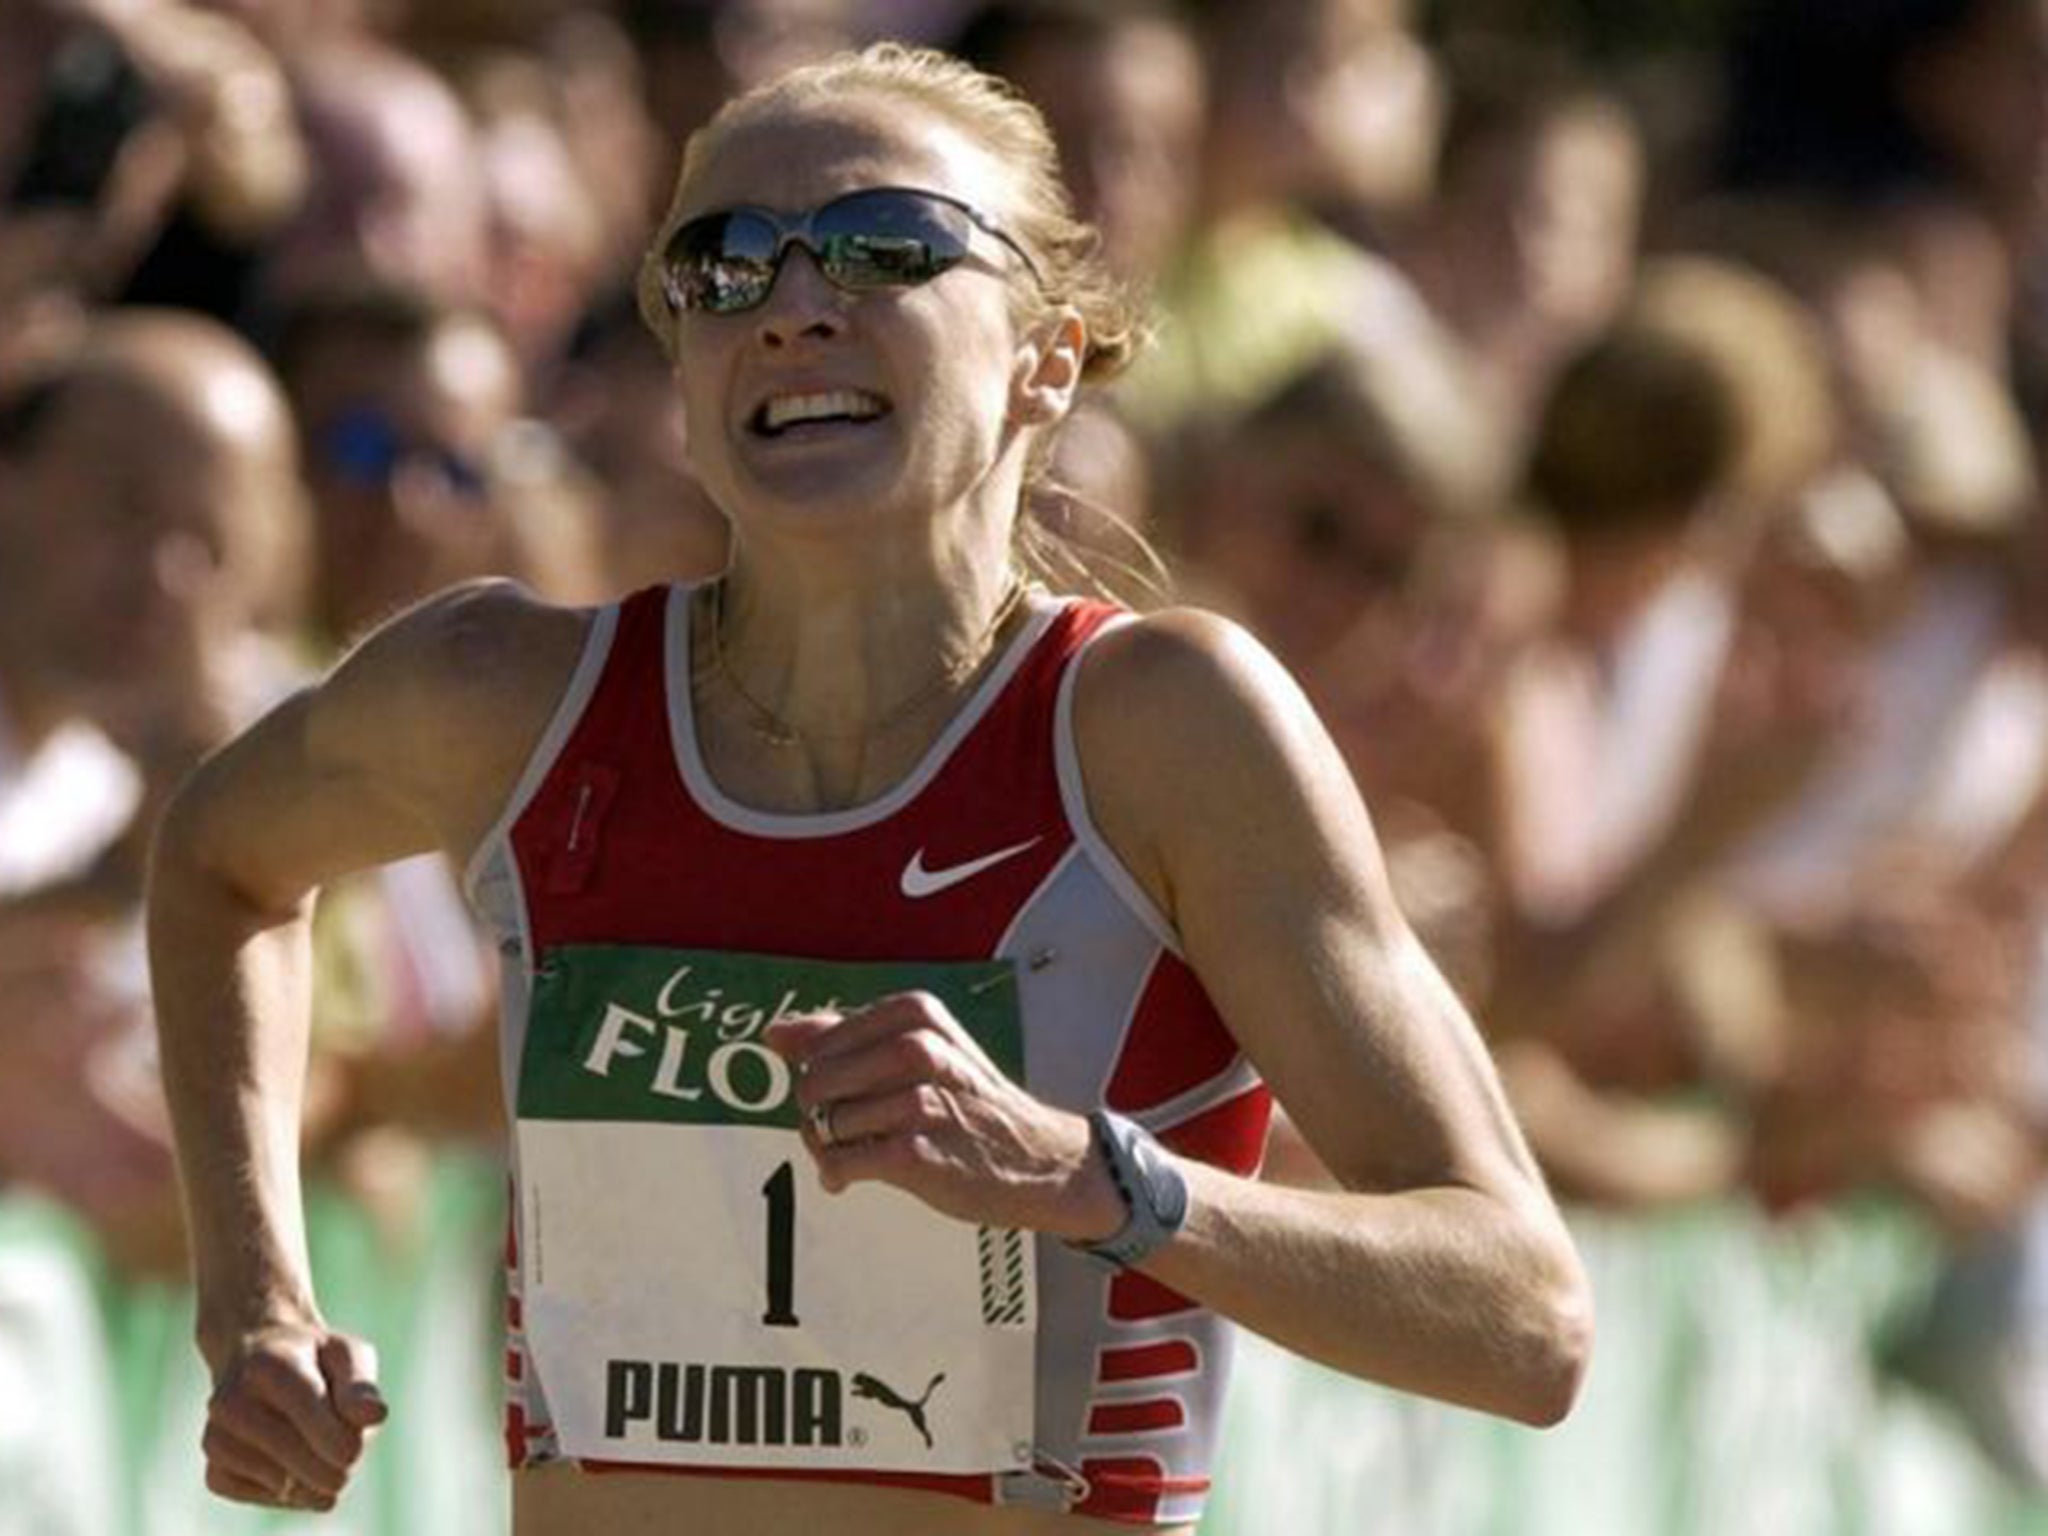 Paula Radcliffe sets a new world record in 2003 as she crosses the finish line at the Flora Light Women's Challenge in Hyde Park, London